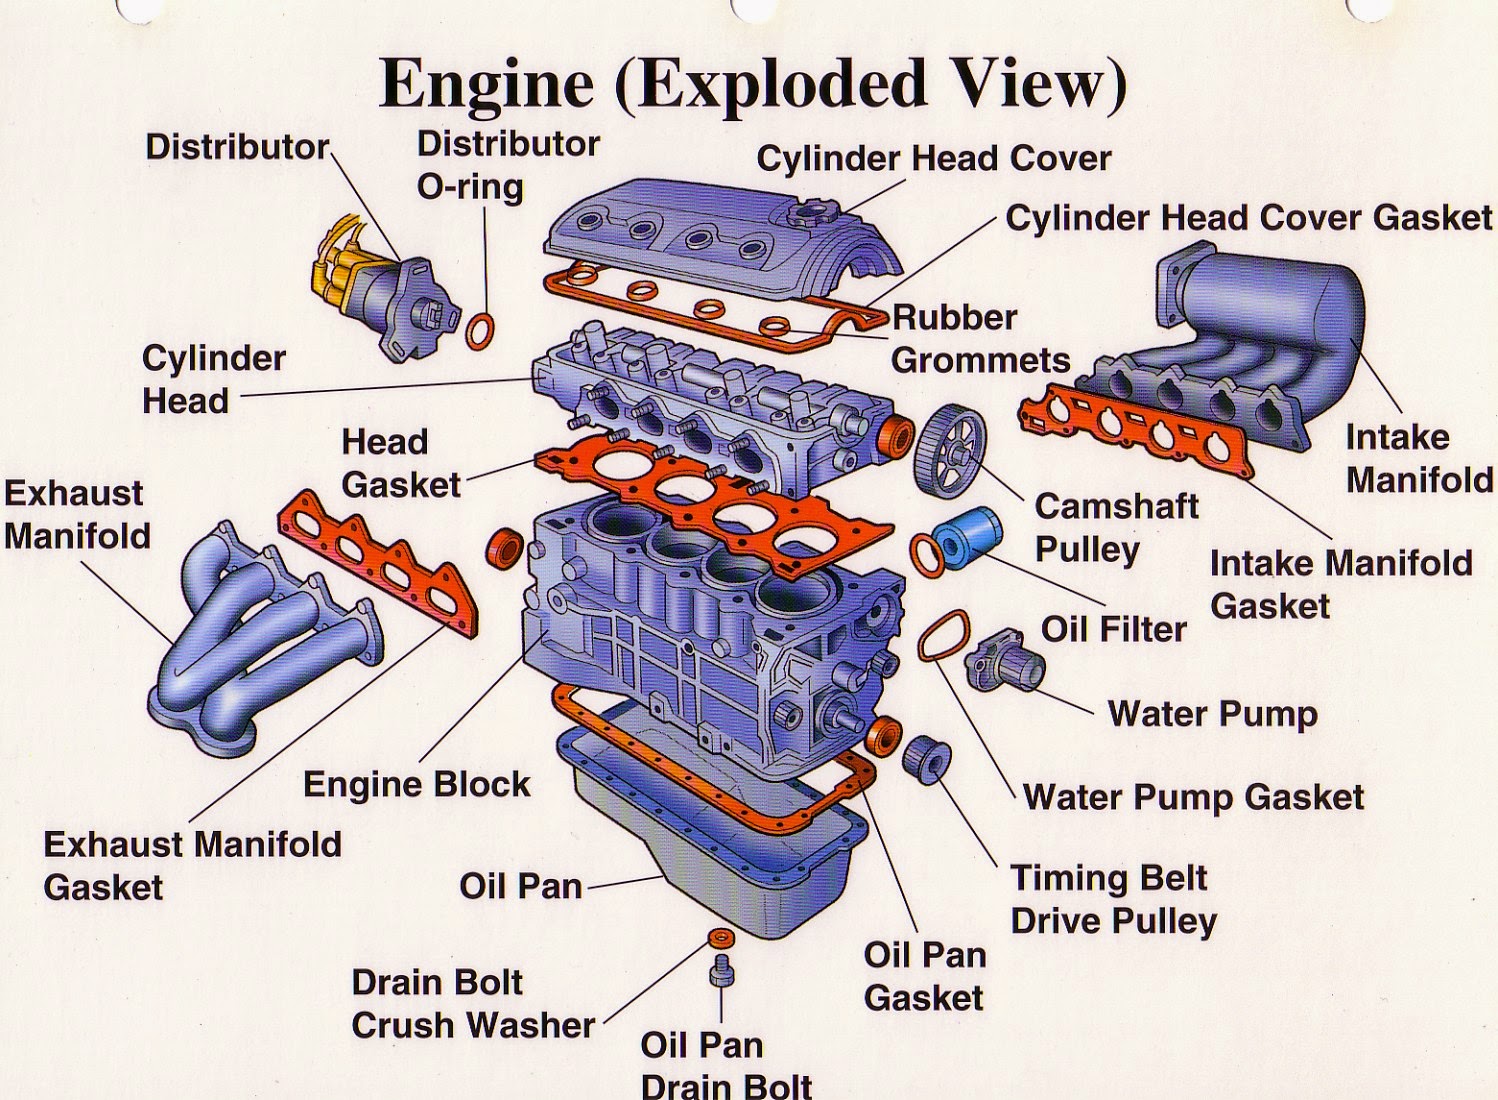 Department of Automobile Engineering: Exploded view of an engine